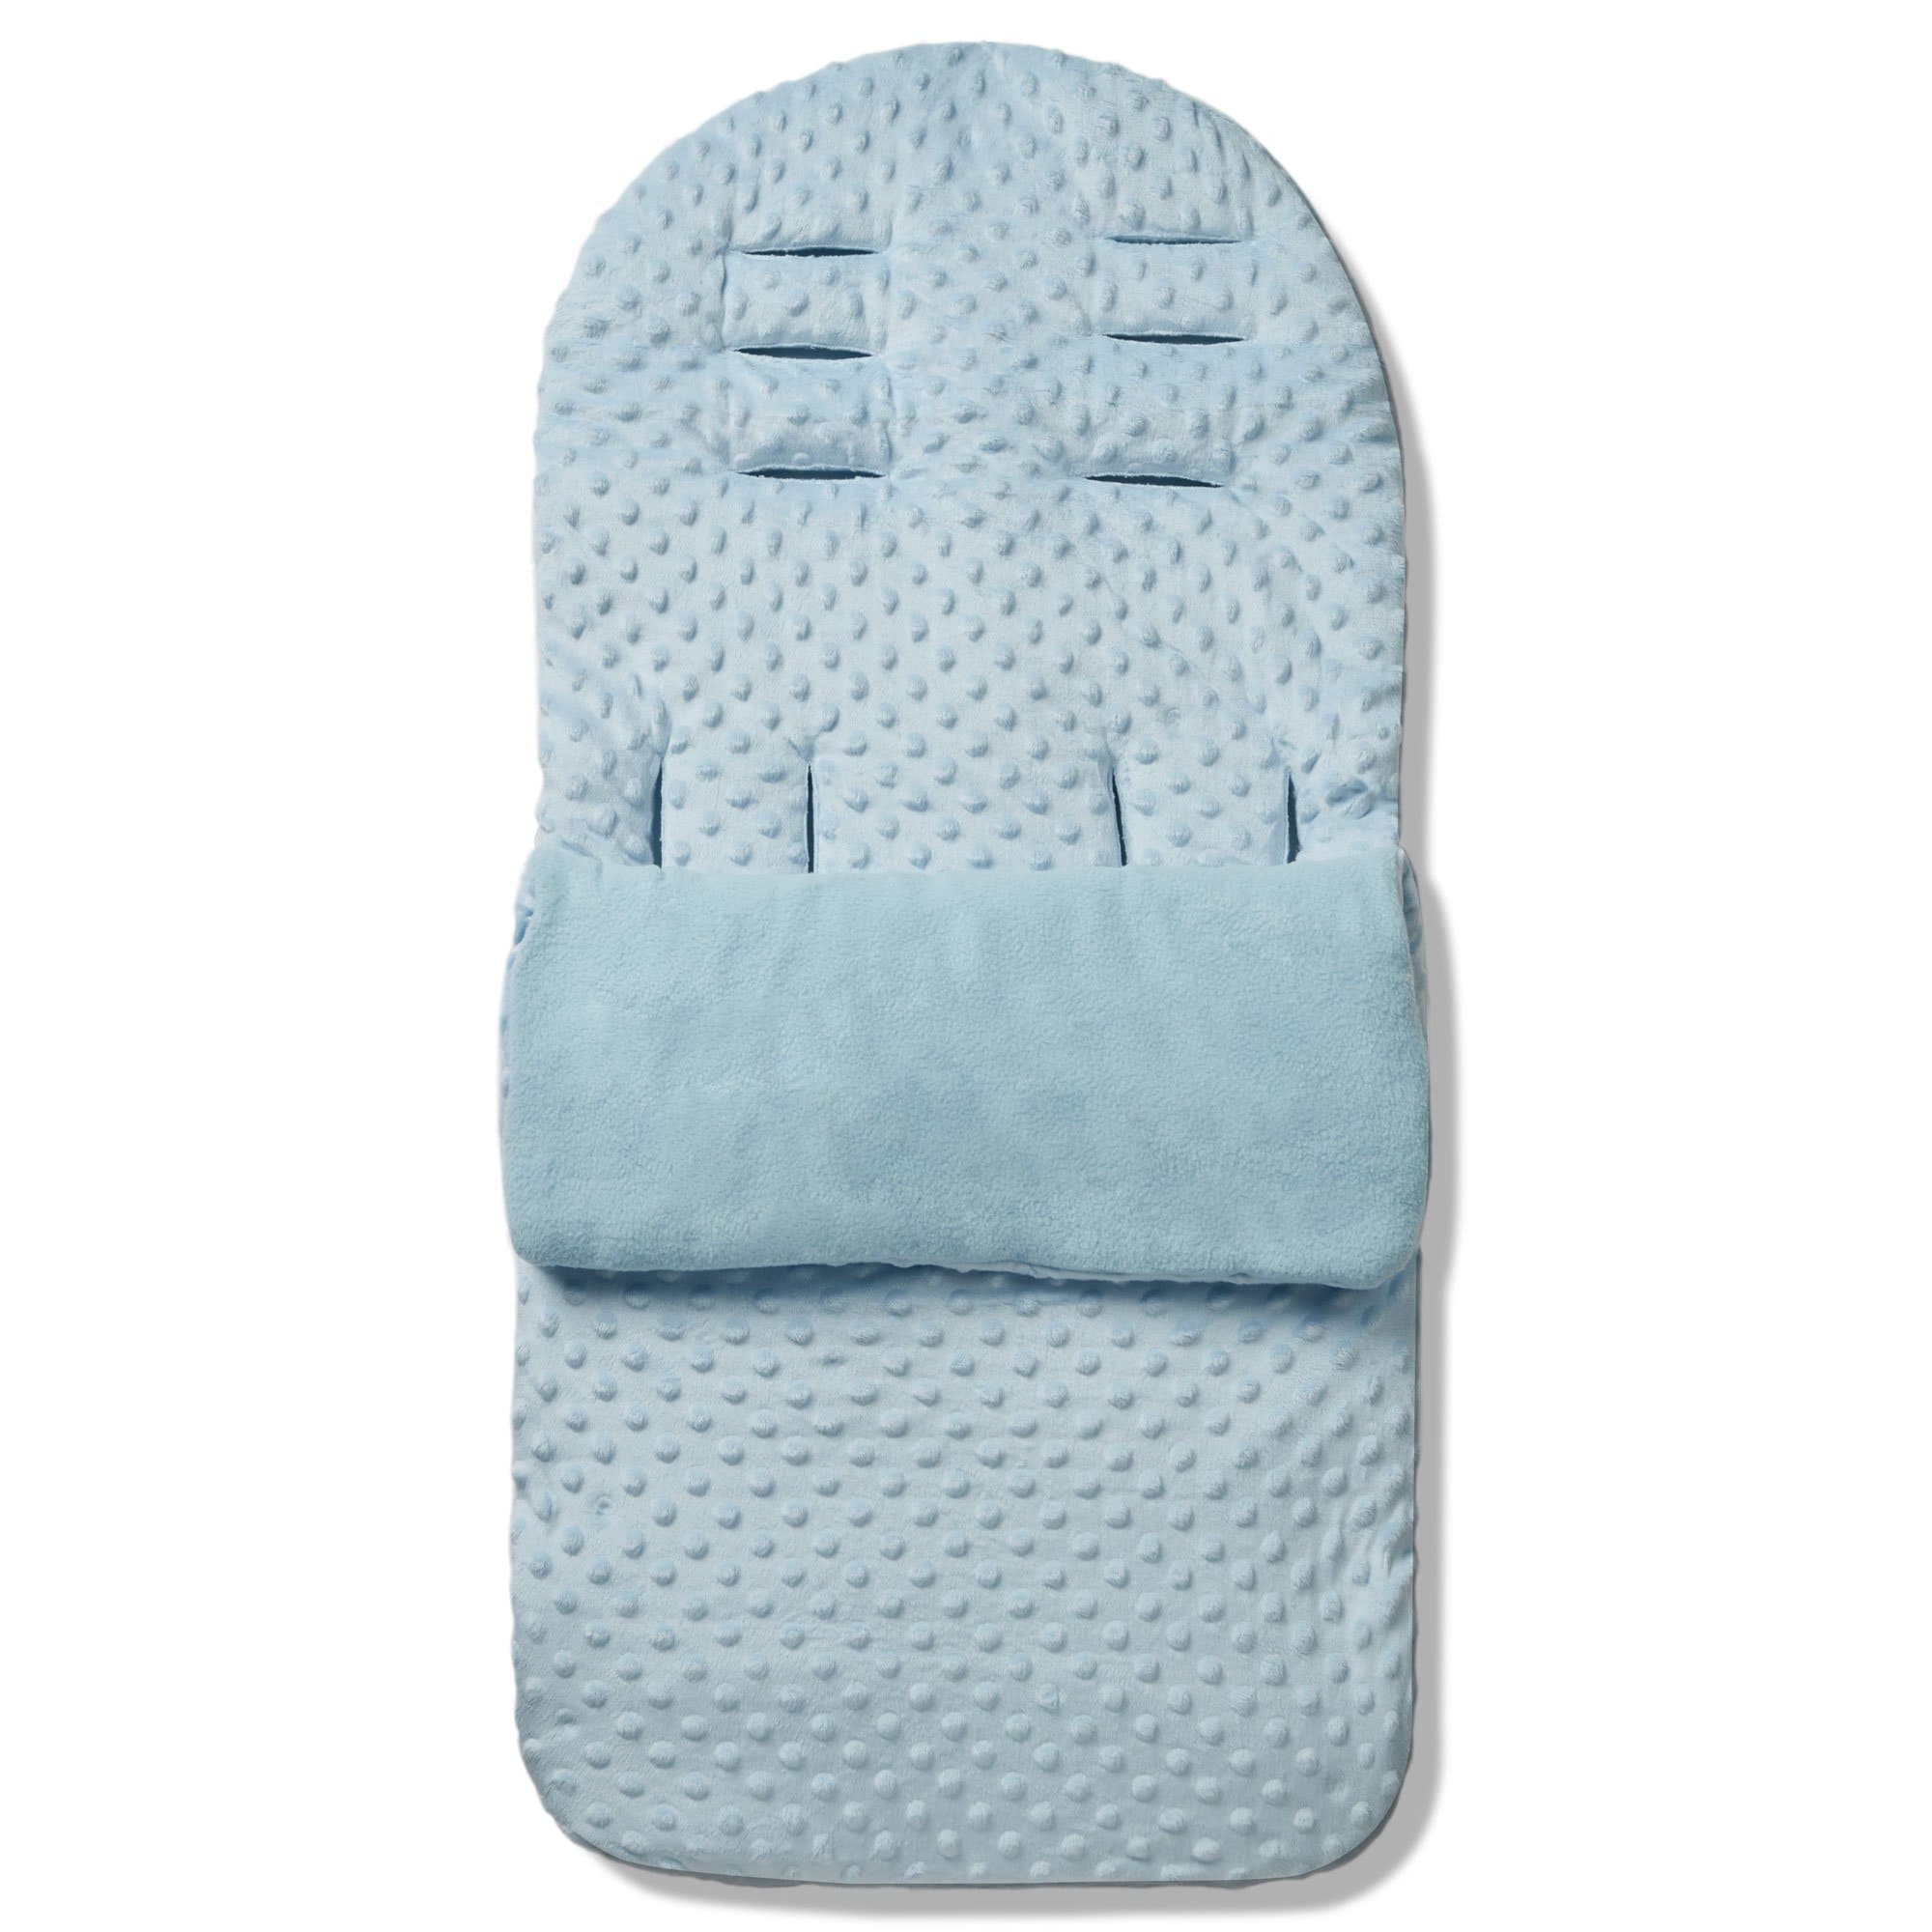 Dimple Footmuff / Cosy Toes Compatible with Pericles - Blue / Fits All Models | For Your Little One